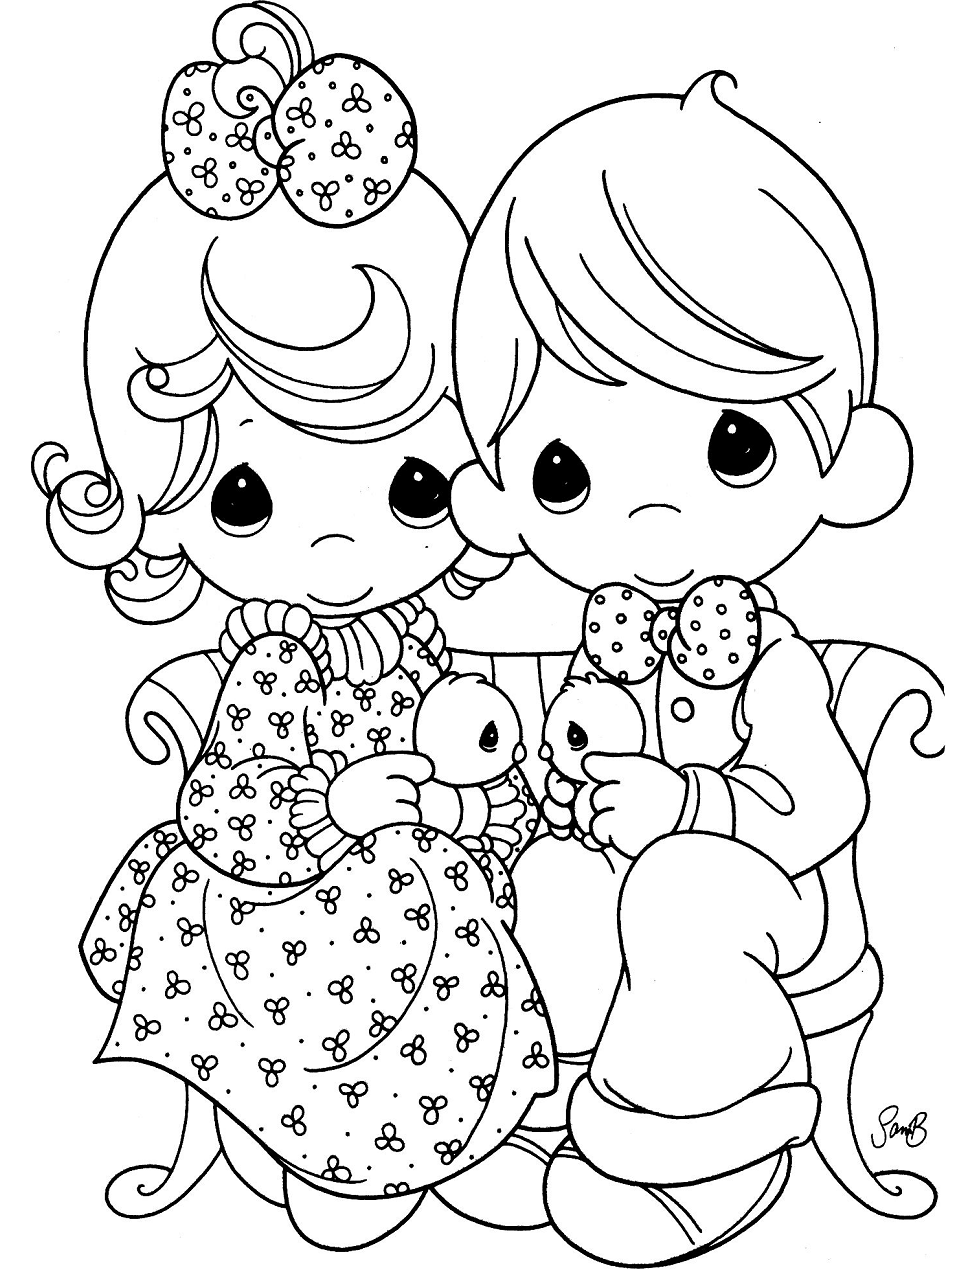 Precious Moments Coloring Pages   Free Printable Coloring Pages ...